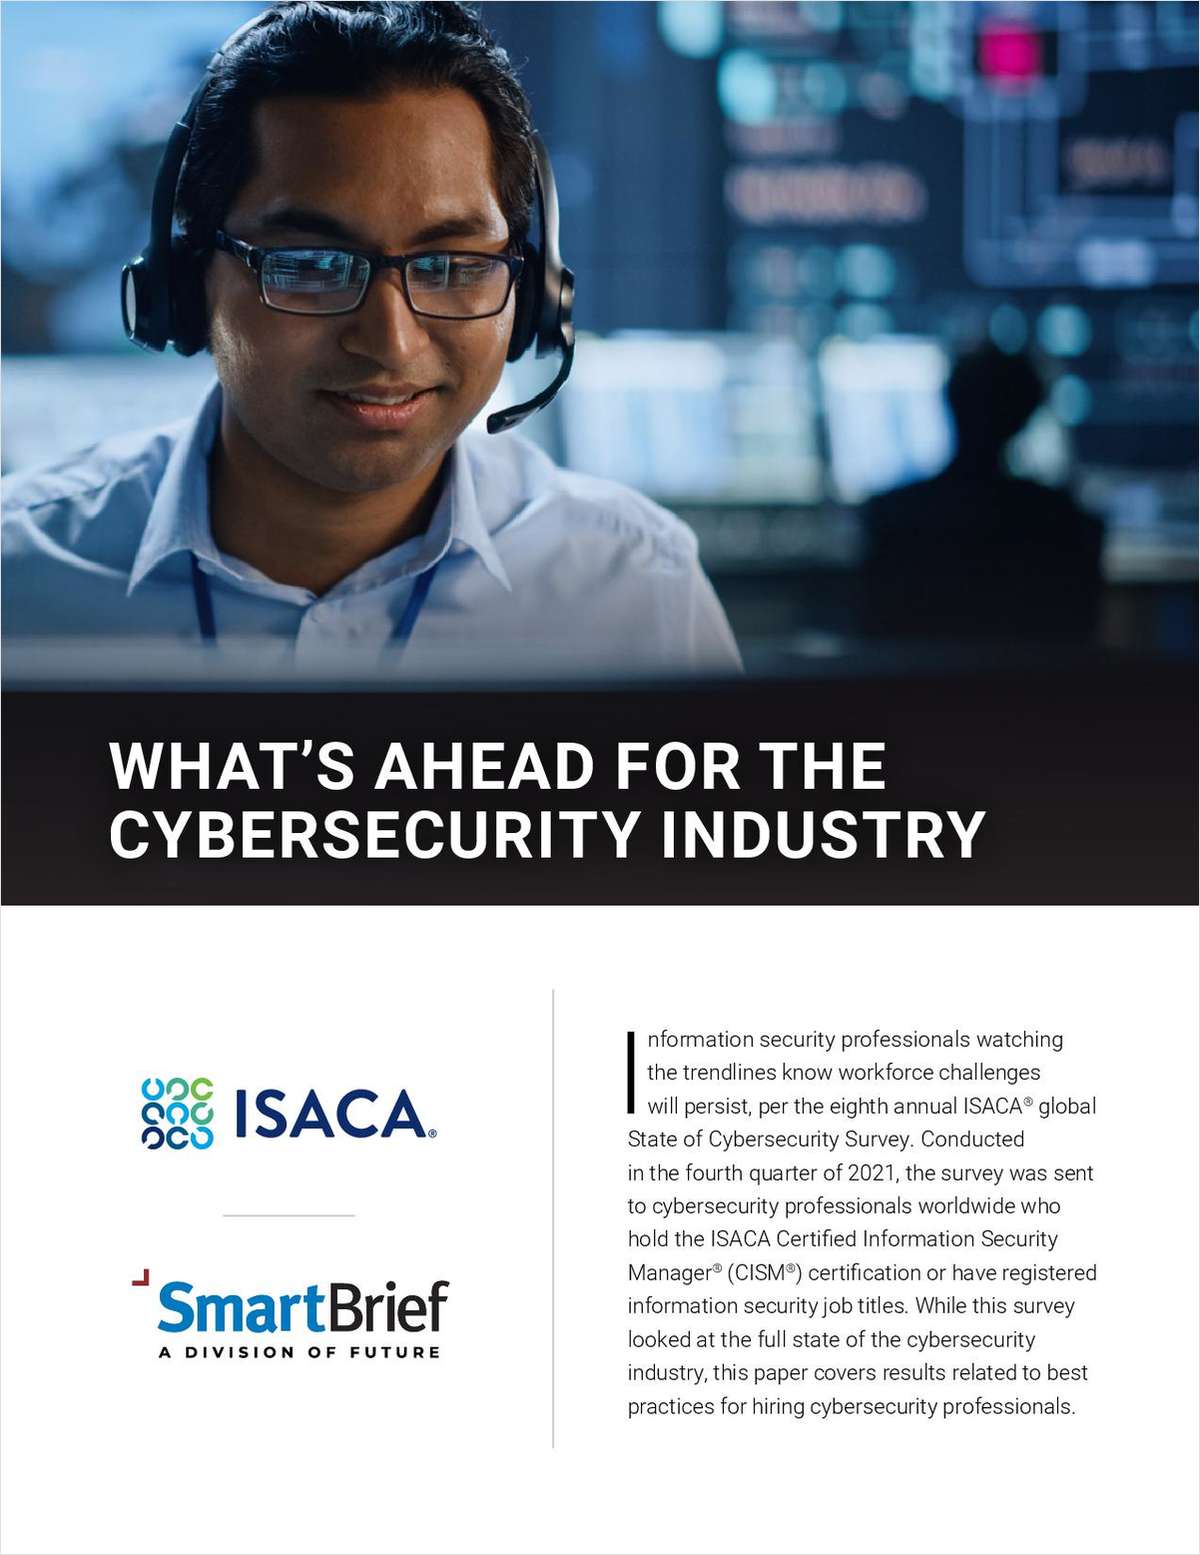 What's Ahead For the Cybersecurity Industry